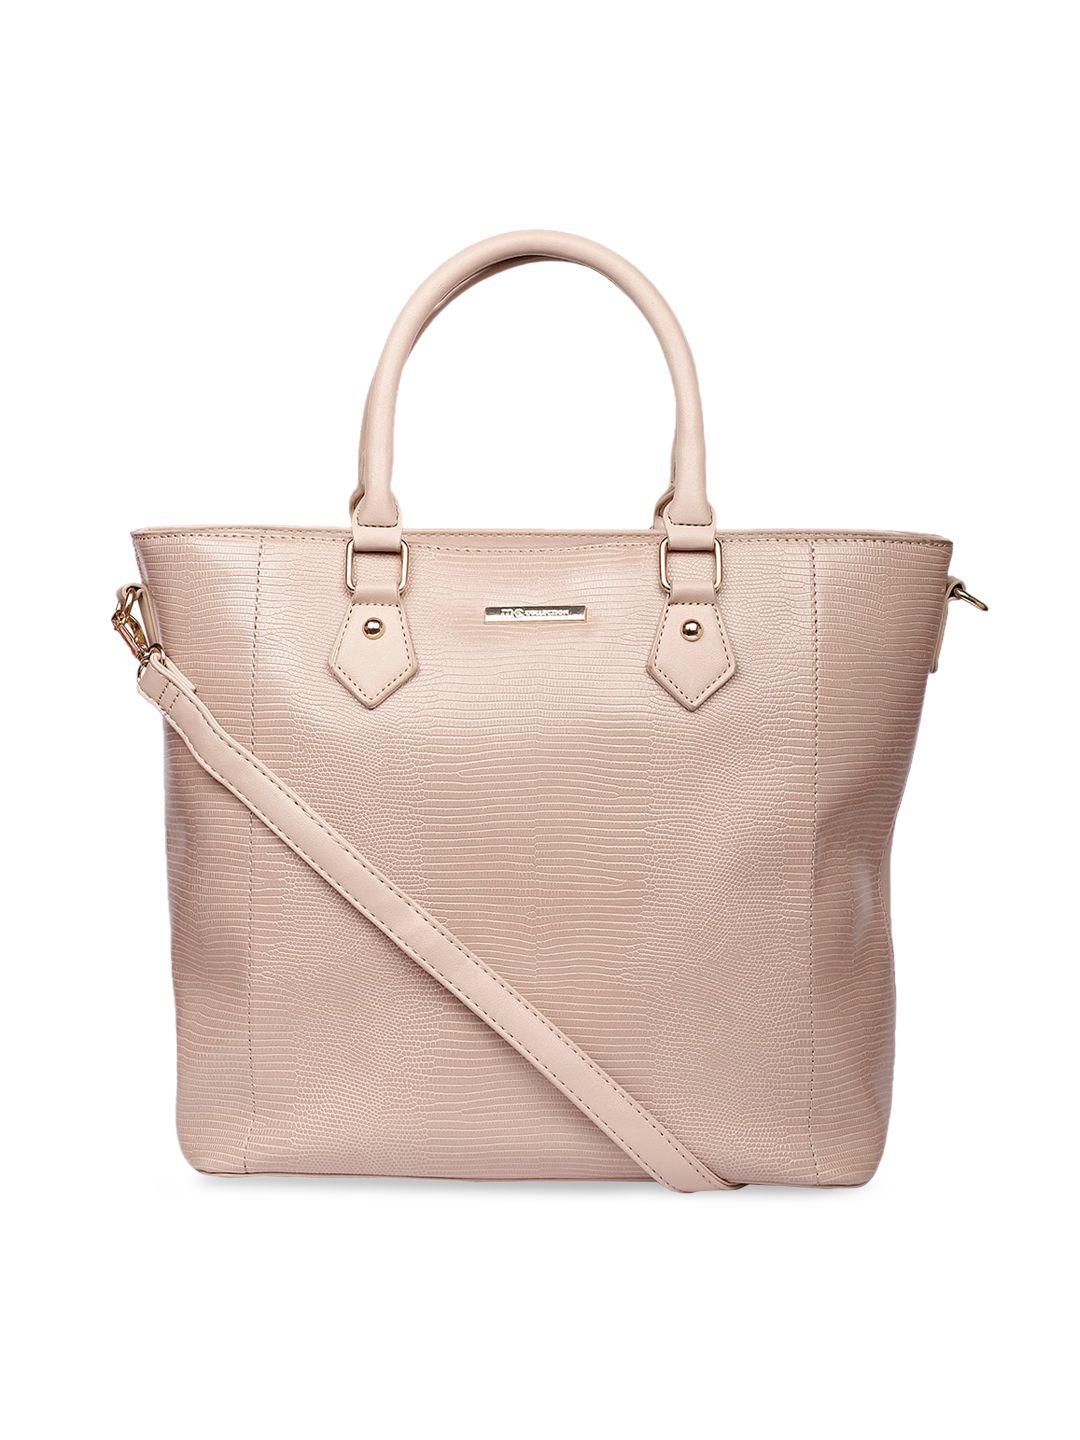 marie claire beige textured oversized shopper tote bag